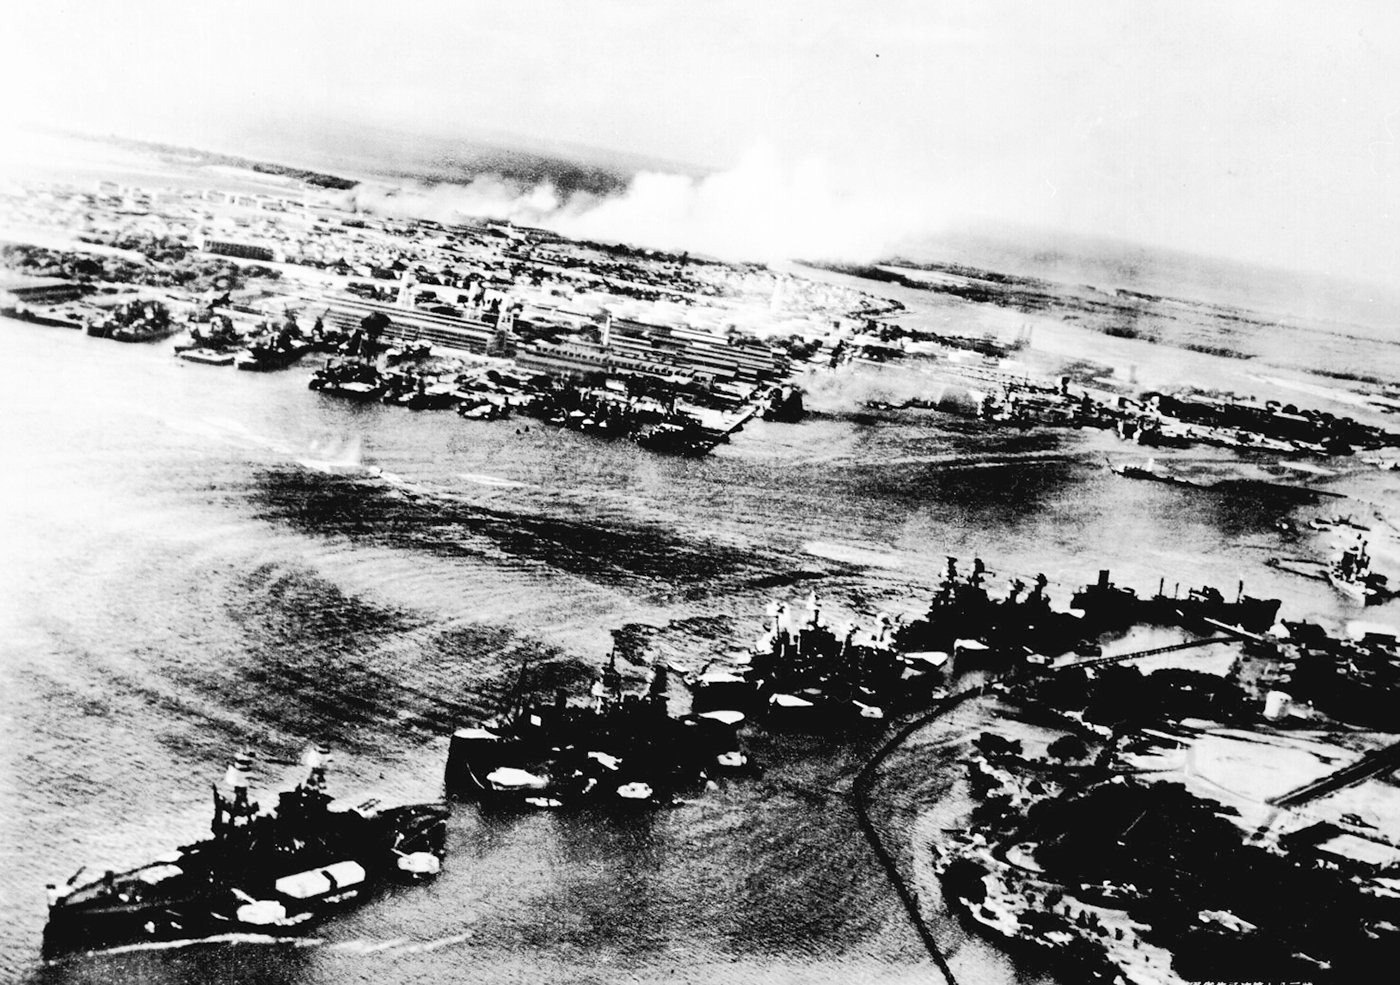 Aerial black and white photograph of the Japanese attack on Pearl Harbor from the perspective of the attackers on December 7, 1941. Smoke billows from Pearl Harbor, T.H., caught off guard during the aerial onslaught. The USS West Virginia is engulfed in flames amidst the chaos of the surprise assault. This image is a captured Japanese photograph from the historic event.